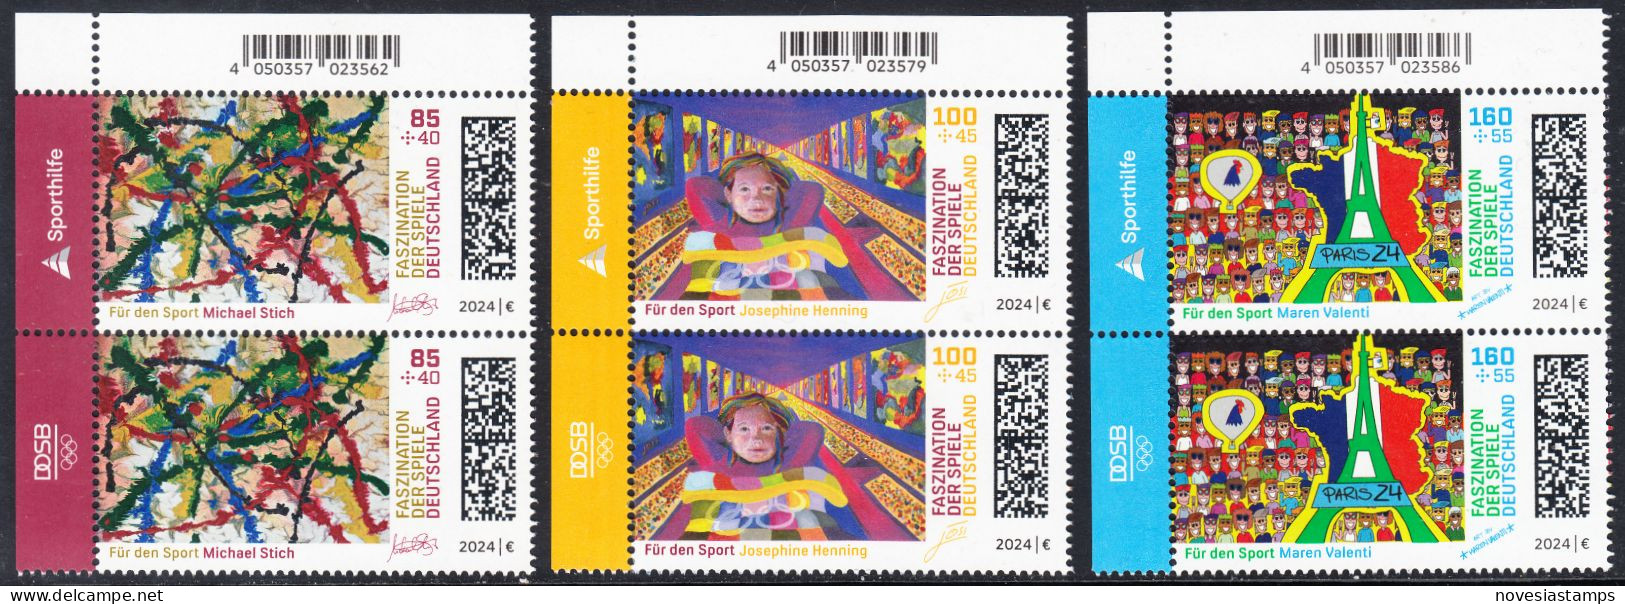 !a! GERMANY 2024 Mi. 3825-3827 MNH SET Of 3 Vert.PAIRS From Upper Left Corners - Olympic Games 2024, Paris - Unused Stamps